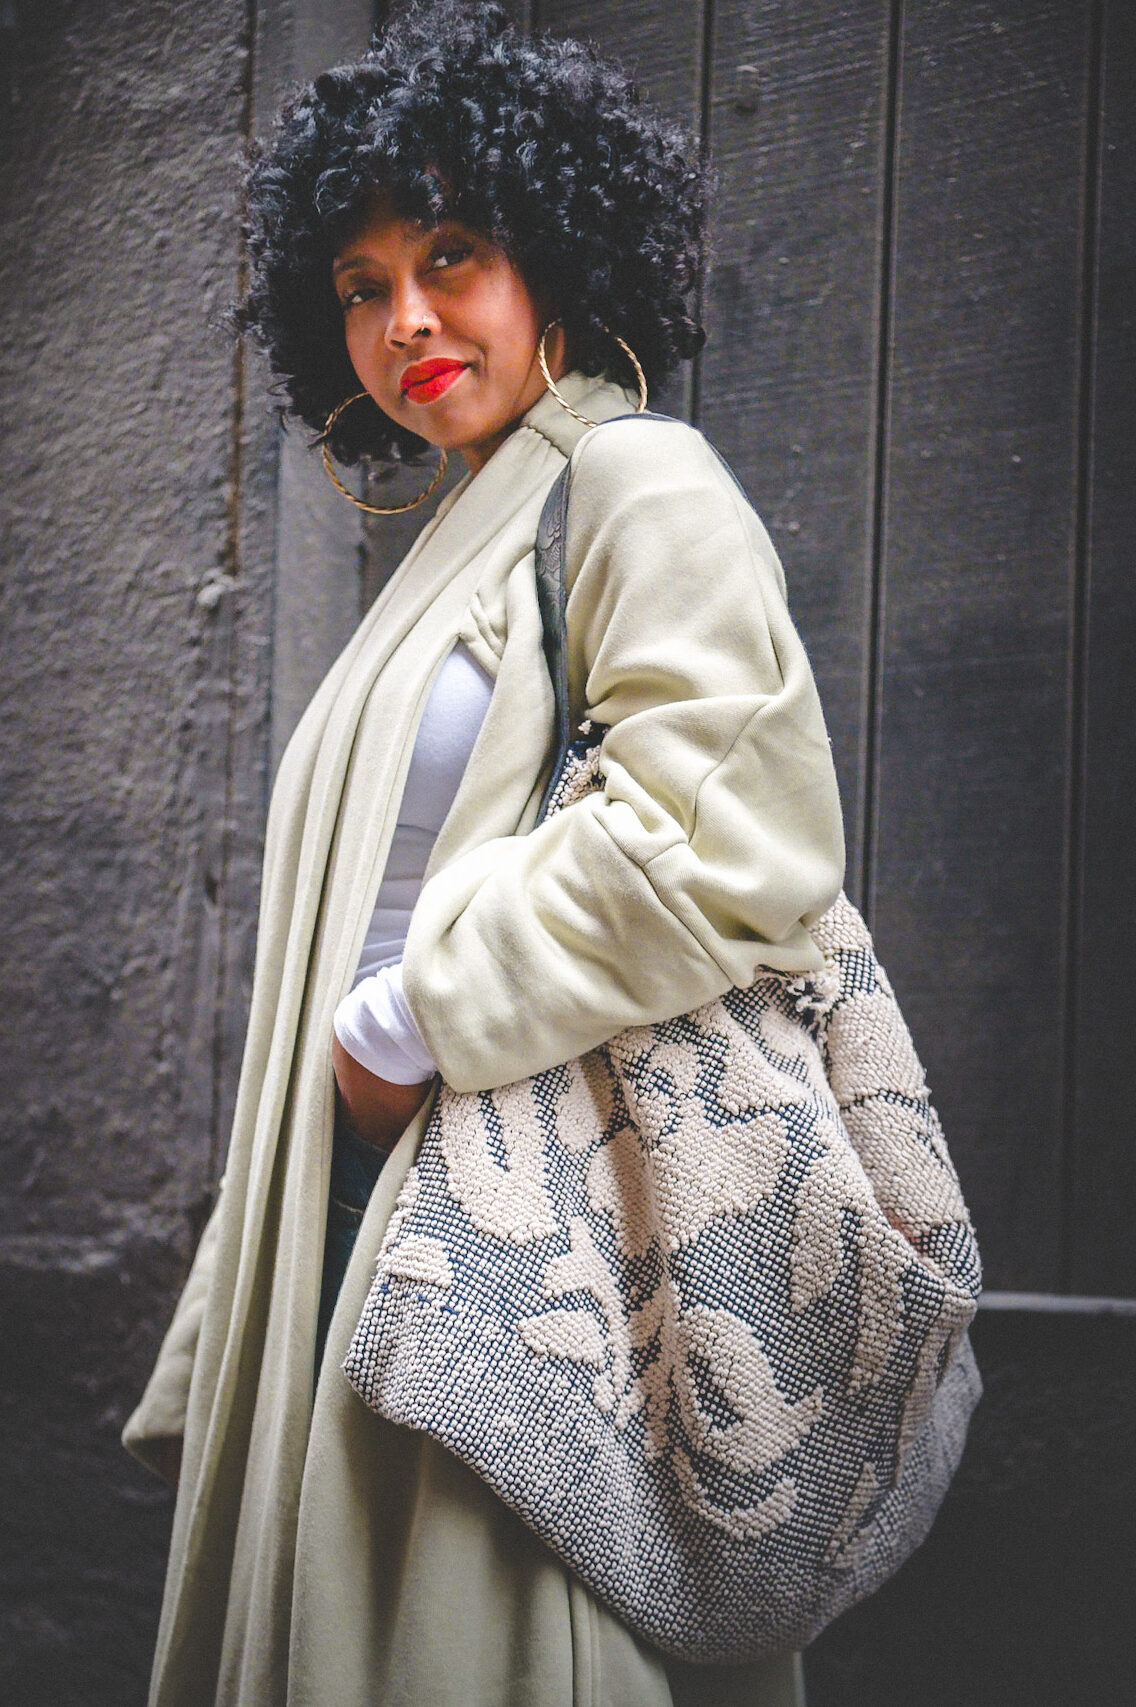 Sweenee Style, Indianapolis Style Influencer, Indianapolis Content Creator, Free People Style, How to Style a Cardigan, Black Girls who blog, Indiana Fashion Blog